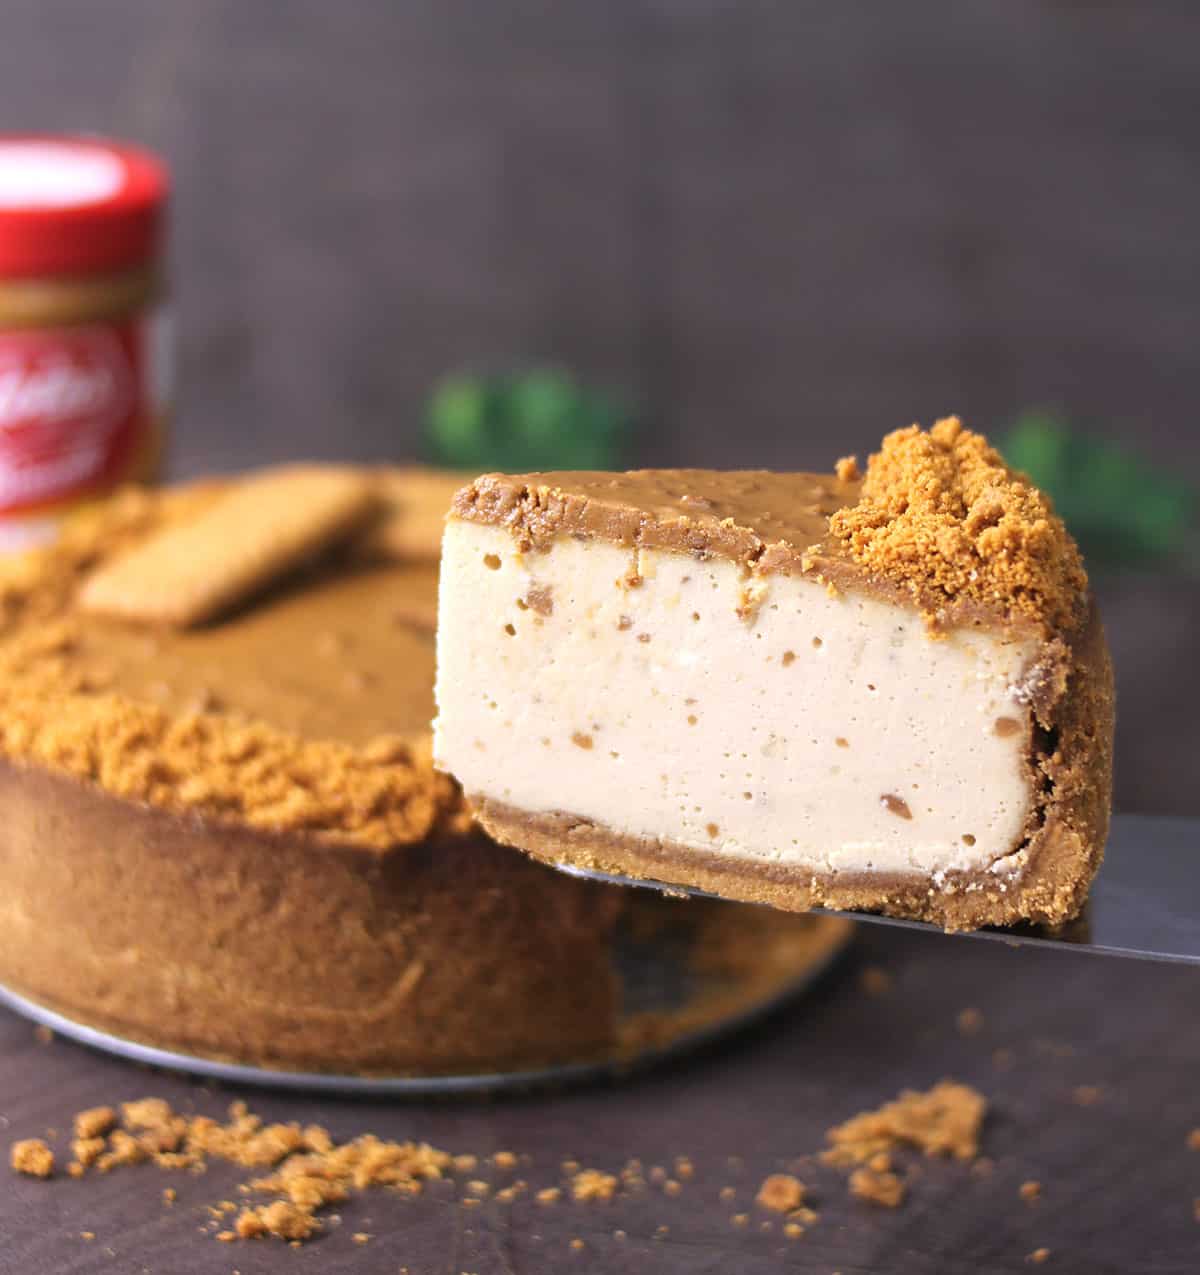 Holding perfectly sliced cheesecake with biscoff crust and cookie butter filling, topping